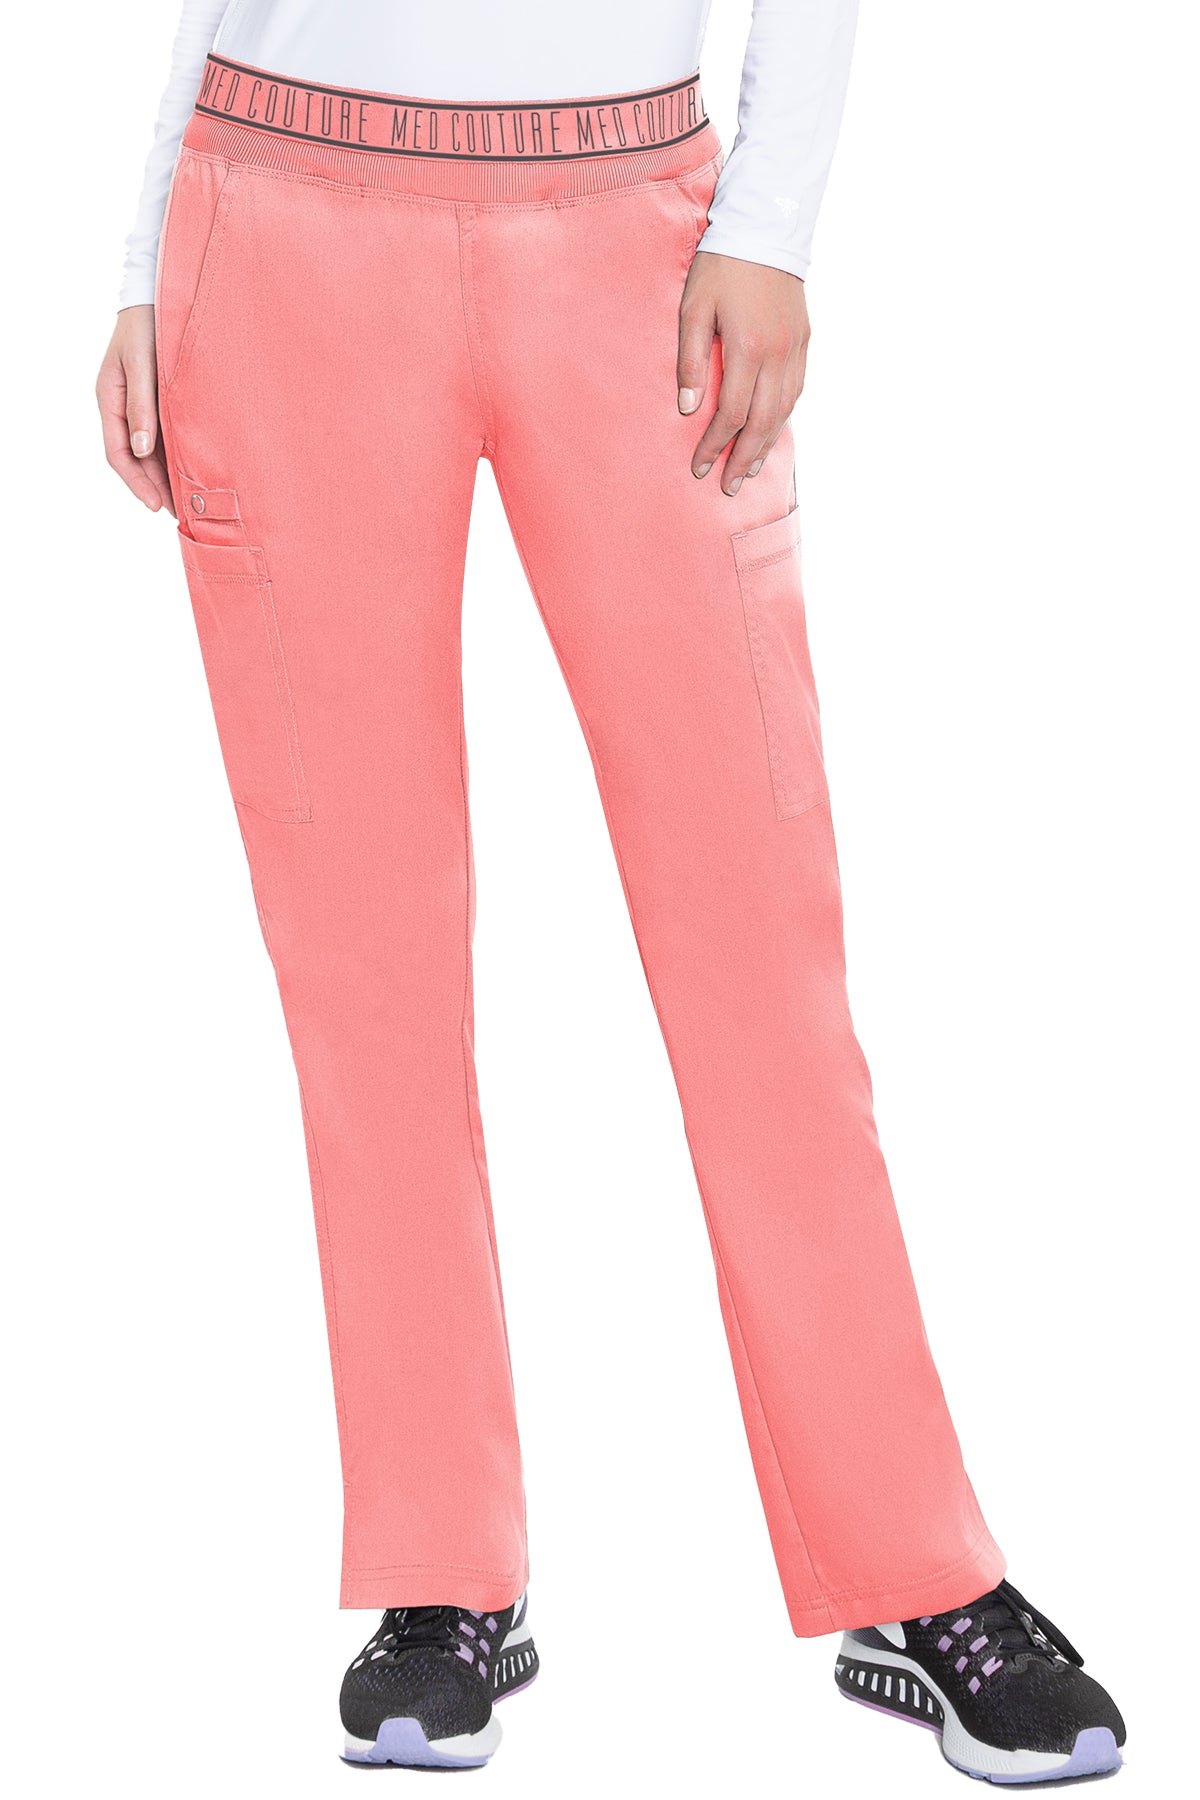 Yoga 2 Cargo Pocket Pant by Med Couture (Regular) XS-5XL/ Coral